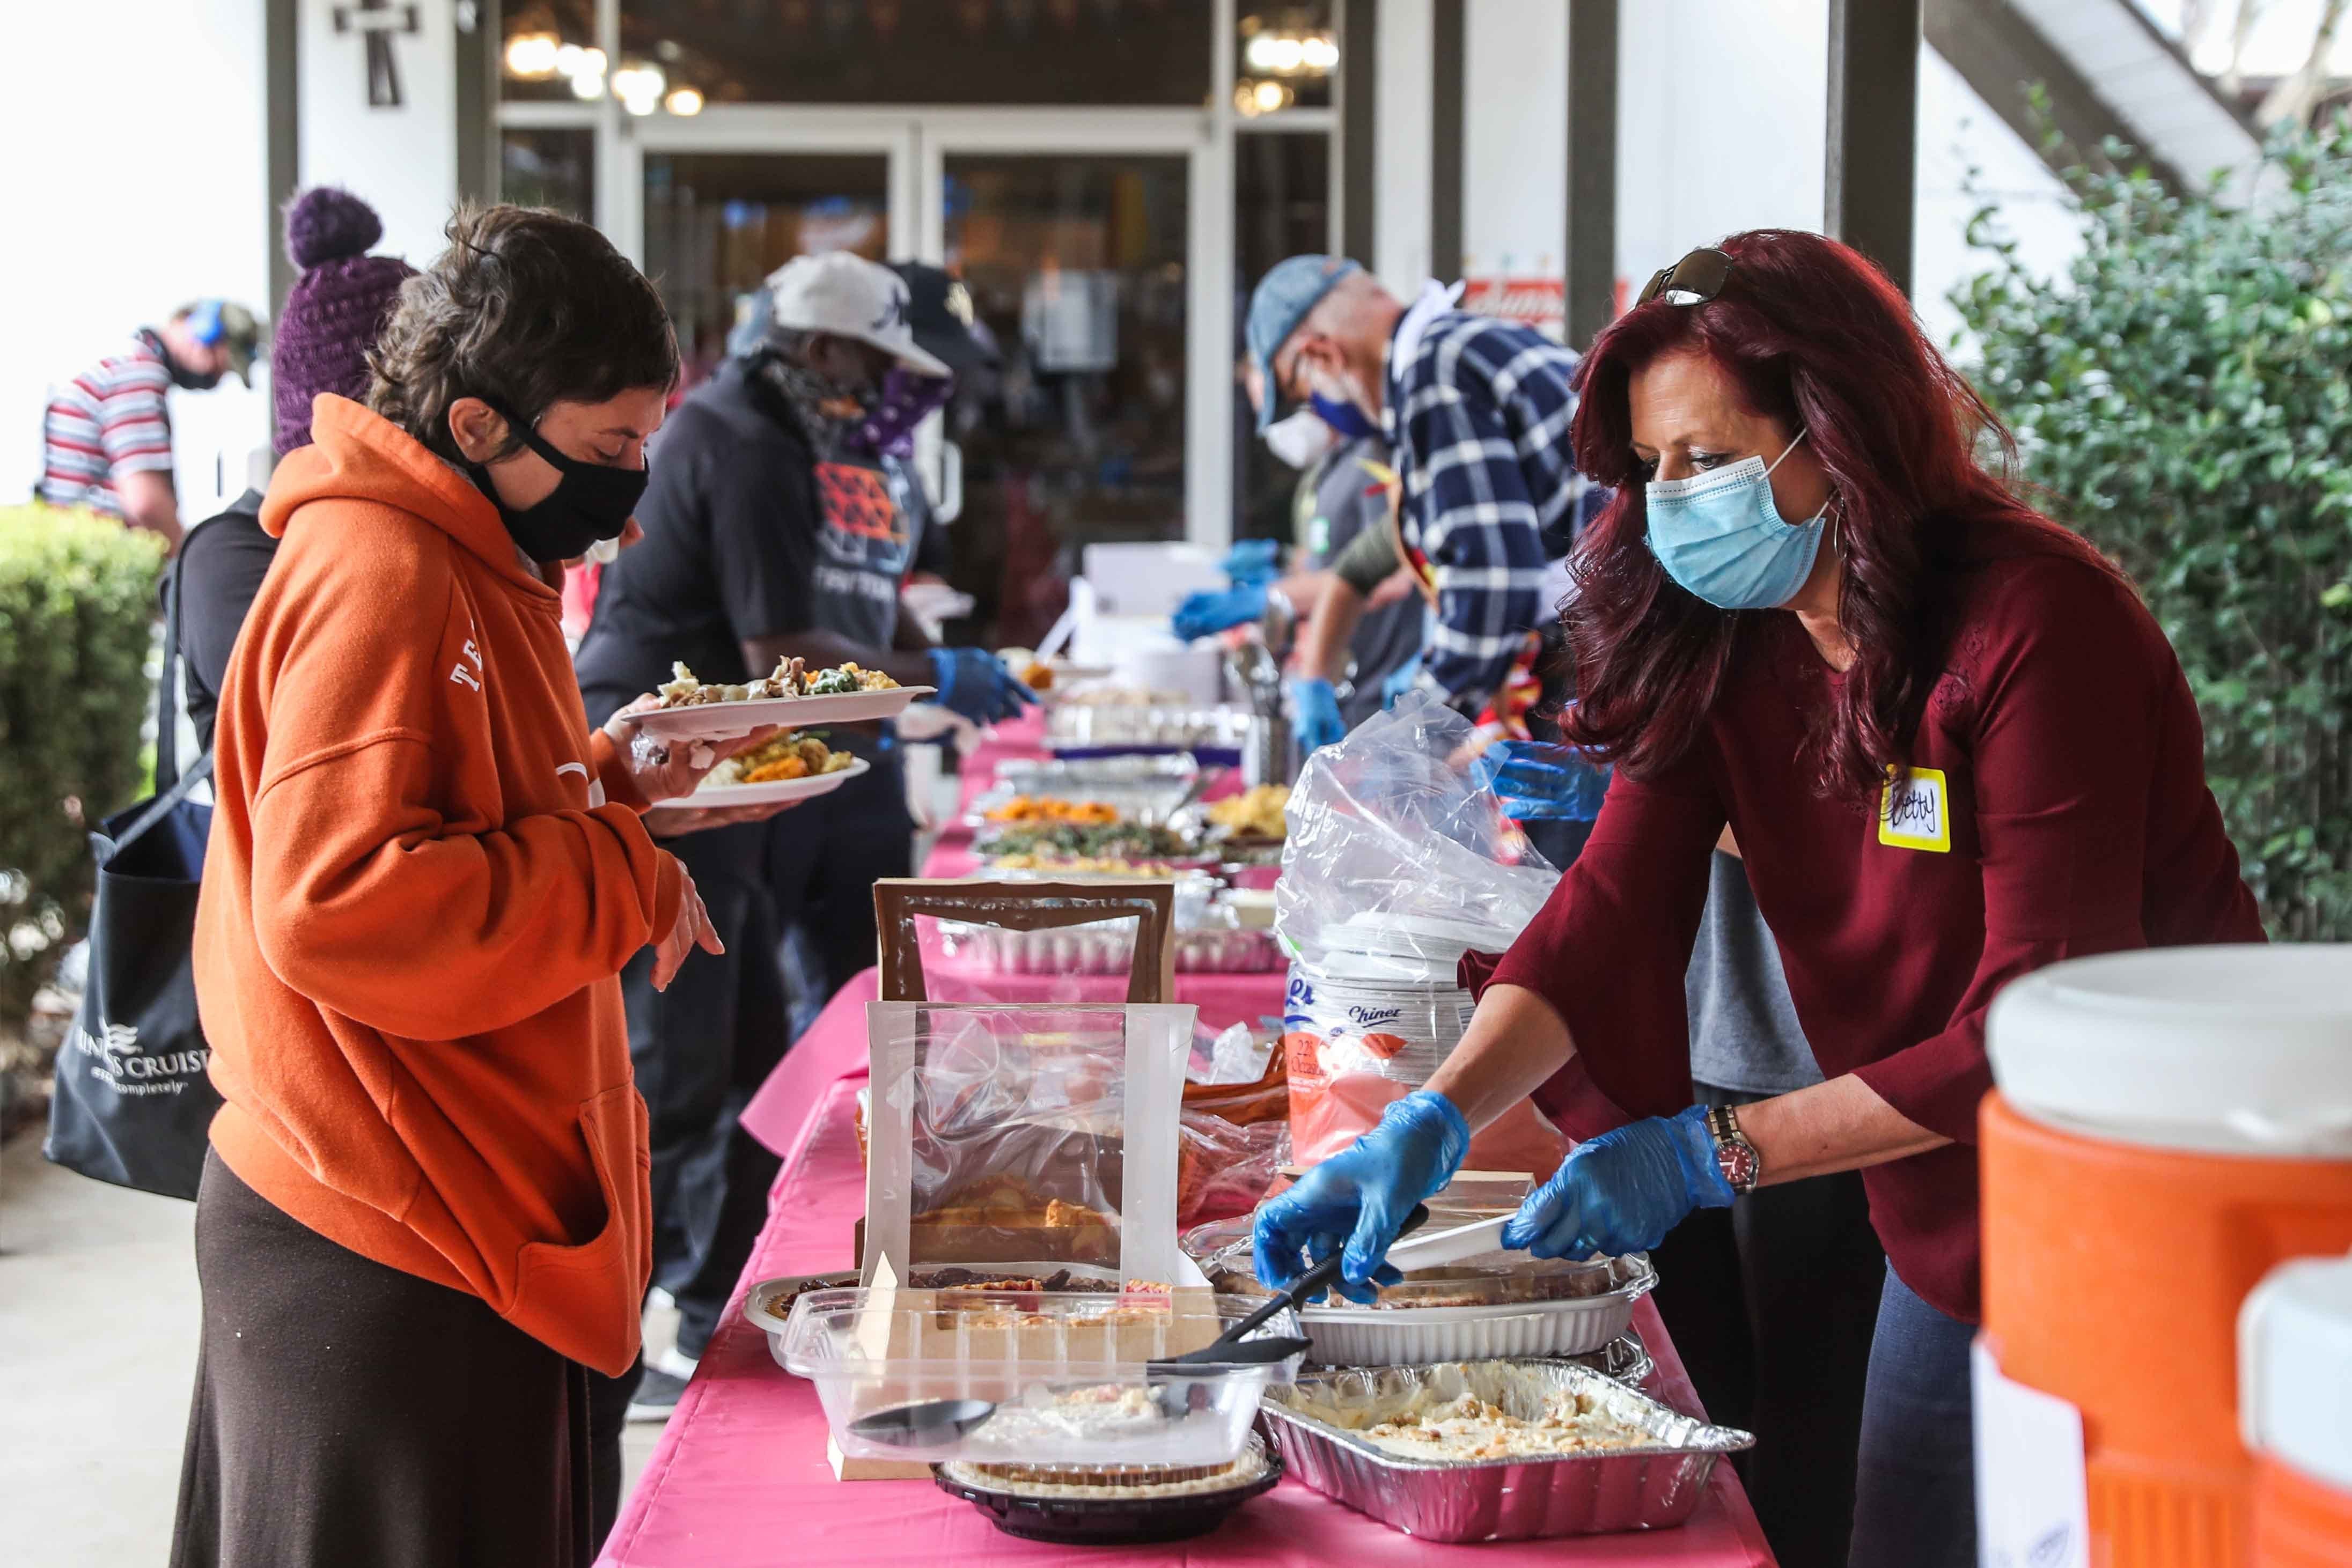 Sunrise Community Church serves Thanksgiving meals to those experiencing homelessness in Austin on Thursday, November 26, 2020.